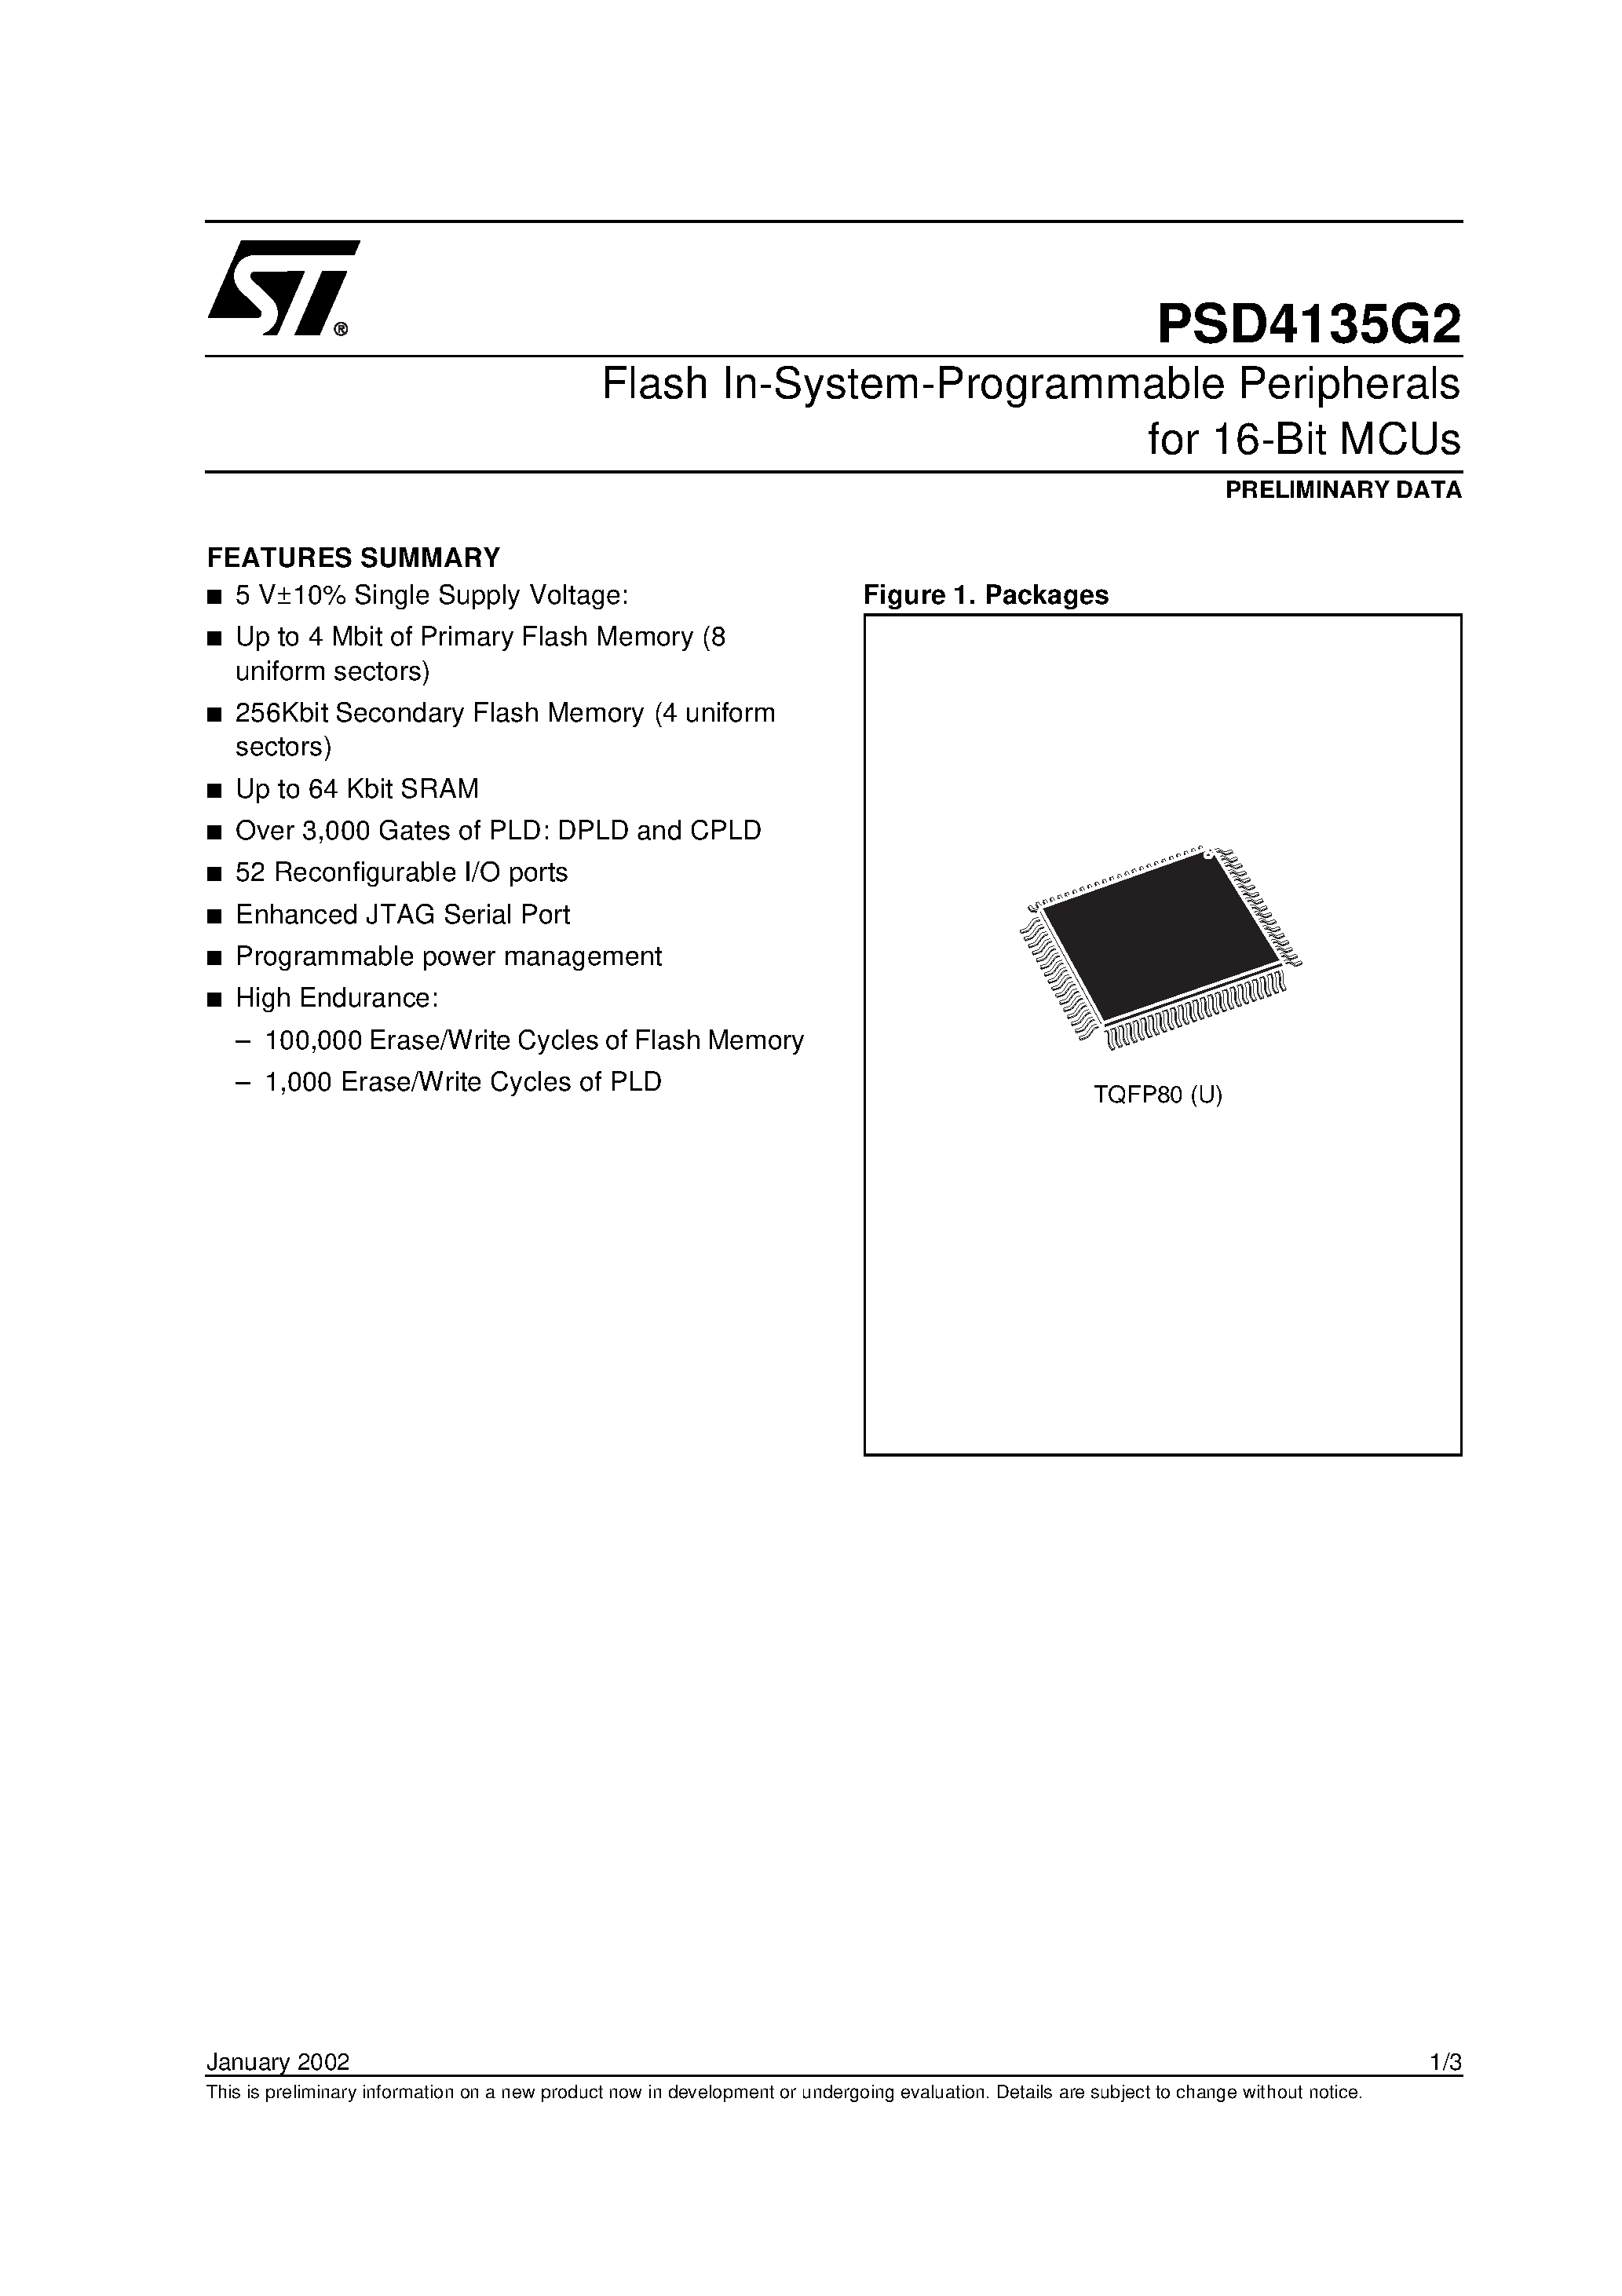 Даташит PSD4135F1-B-12UI - Flash In-System-Programmable Peripherals for 16-Bit MCUs страница 1